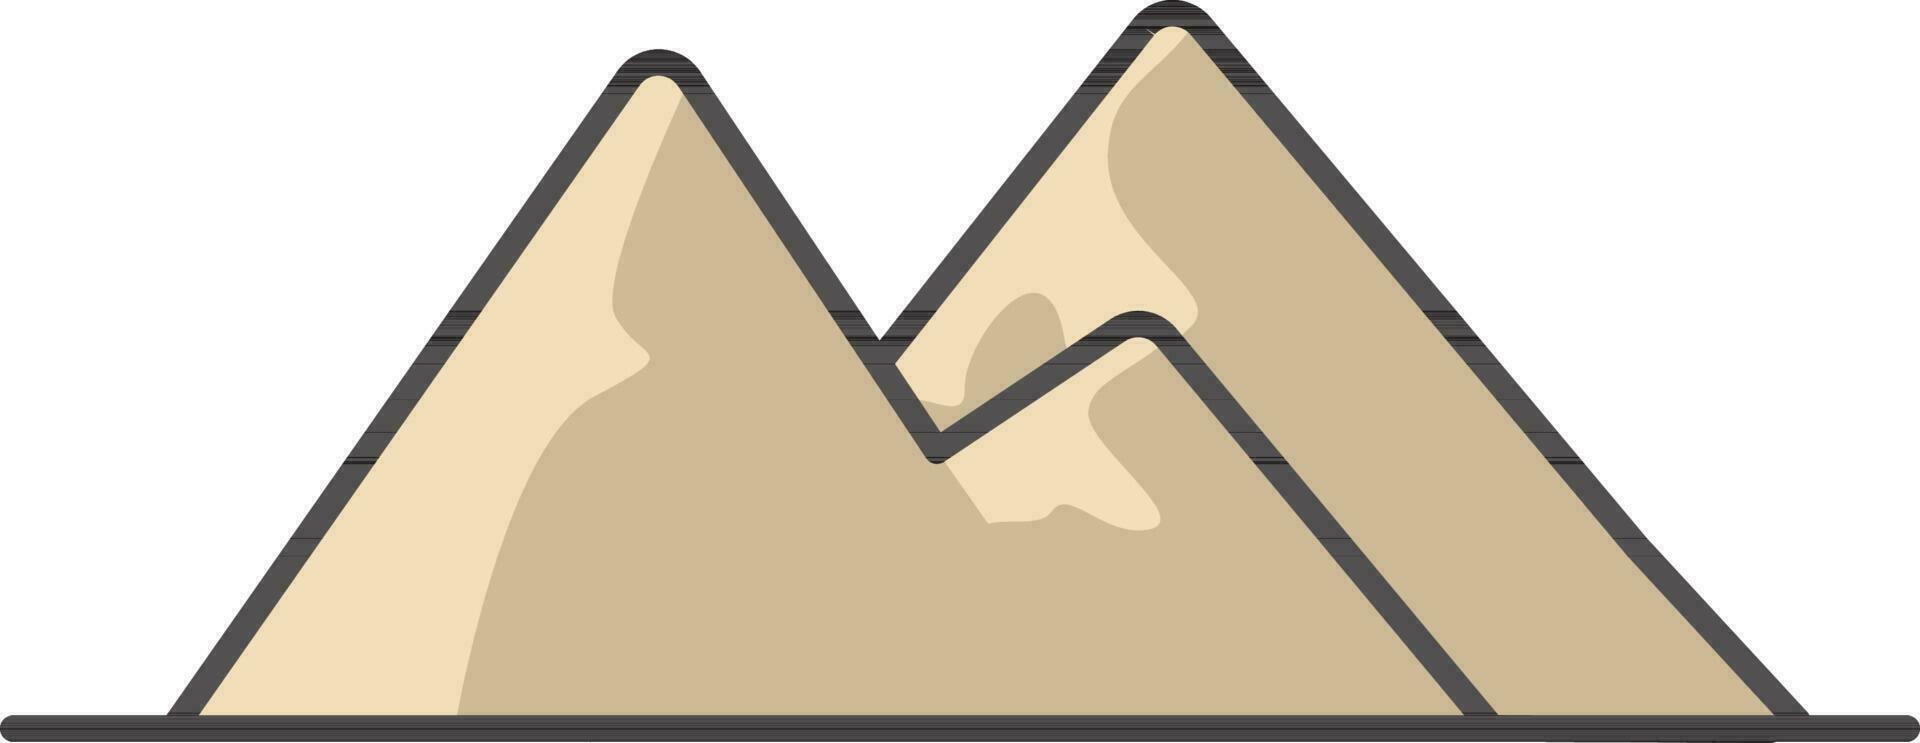 Peach Mountain Landscape Icon In Flat Style. vector